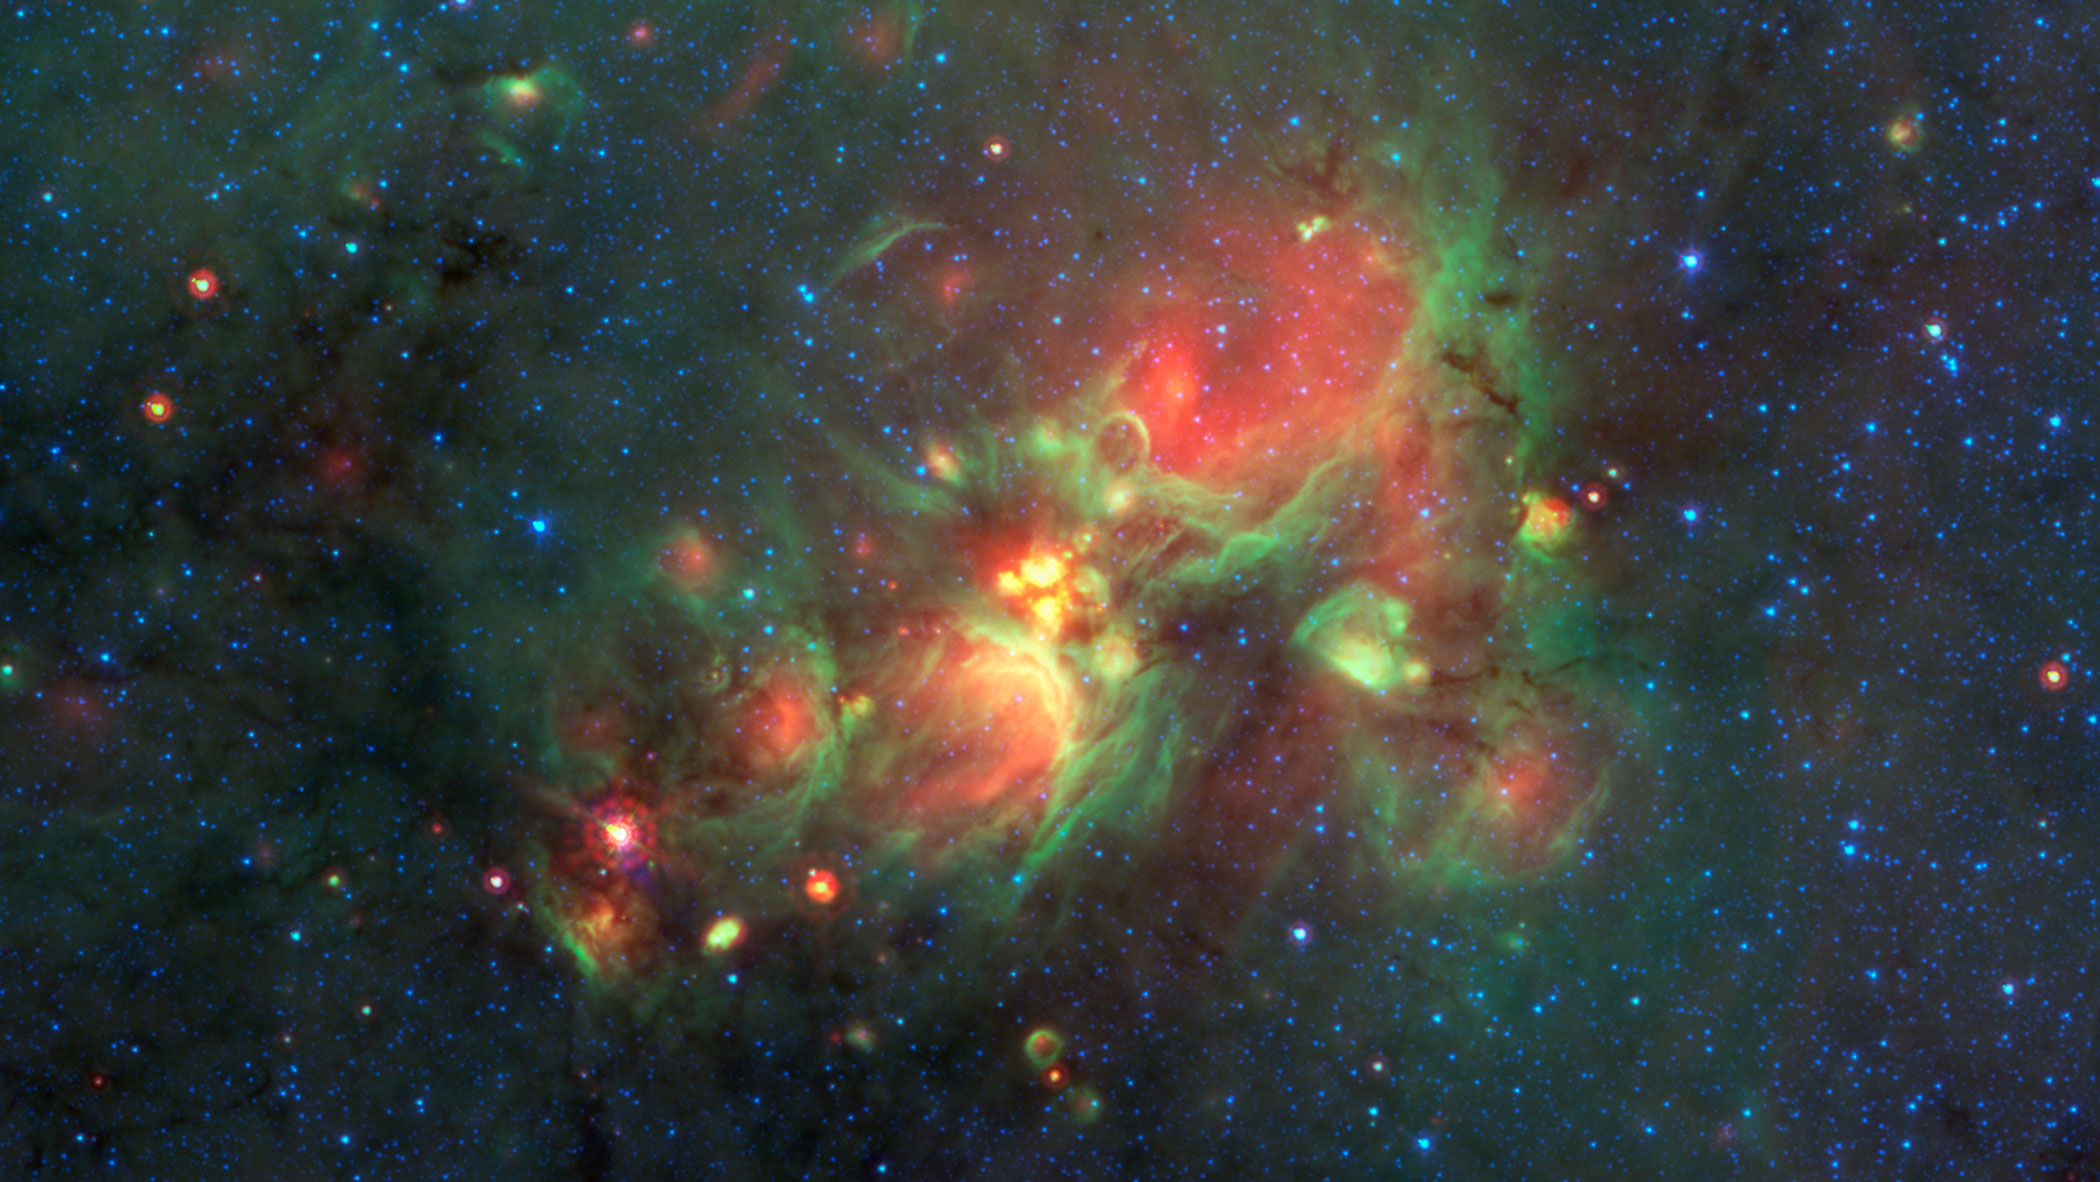 Volunteers using the web-based Milky Way Project brought star-forming features nicknamed "yellowballs" to the attention of researchers, who later showed that they are a phase of massive star formation.